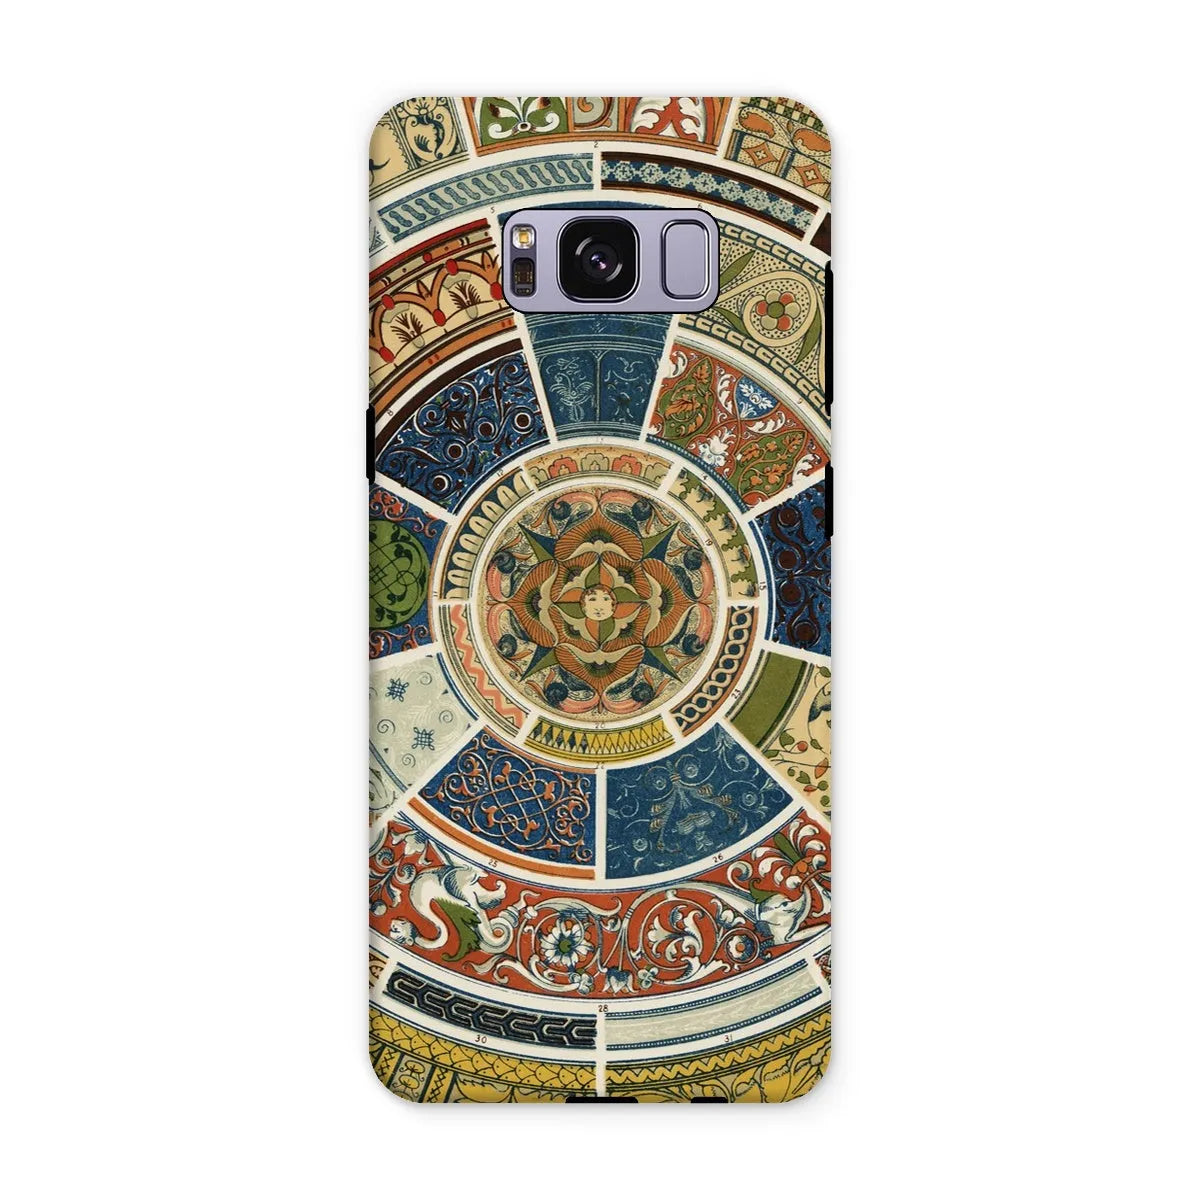 Another Grammar Of Ornament Aesthetic Pattern Art Phone Case - Samsung Galaxy S8 Plus / Matte - Mobile Phone Cases